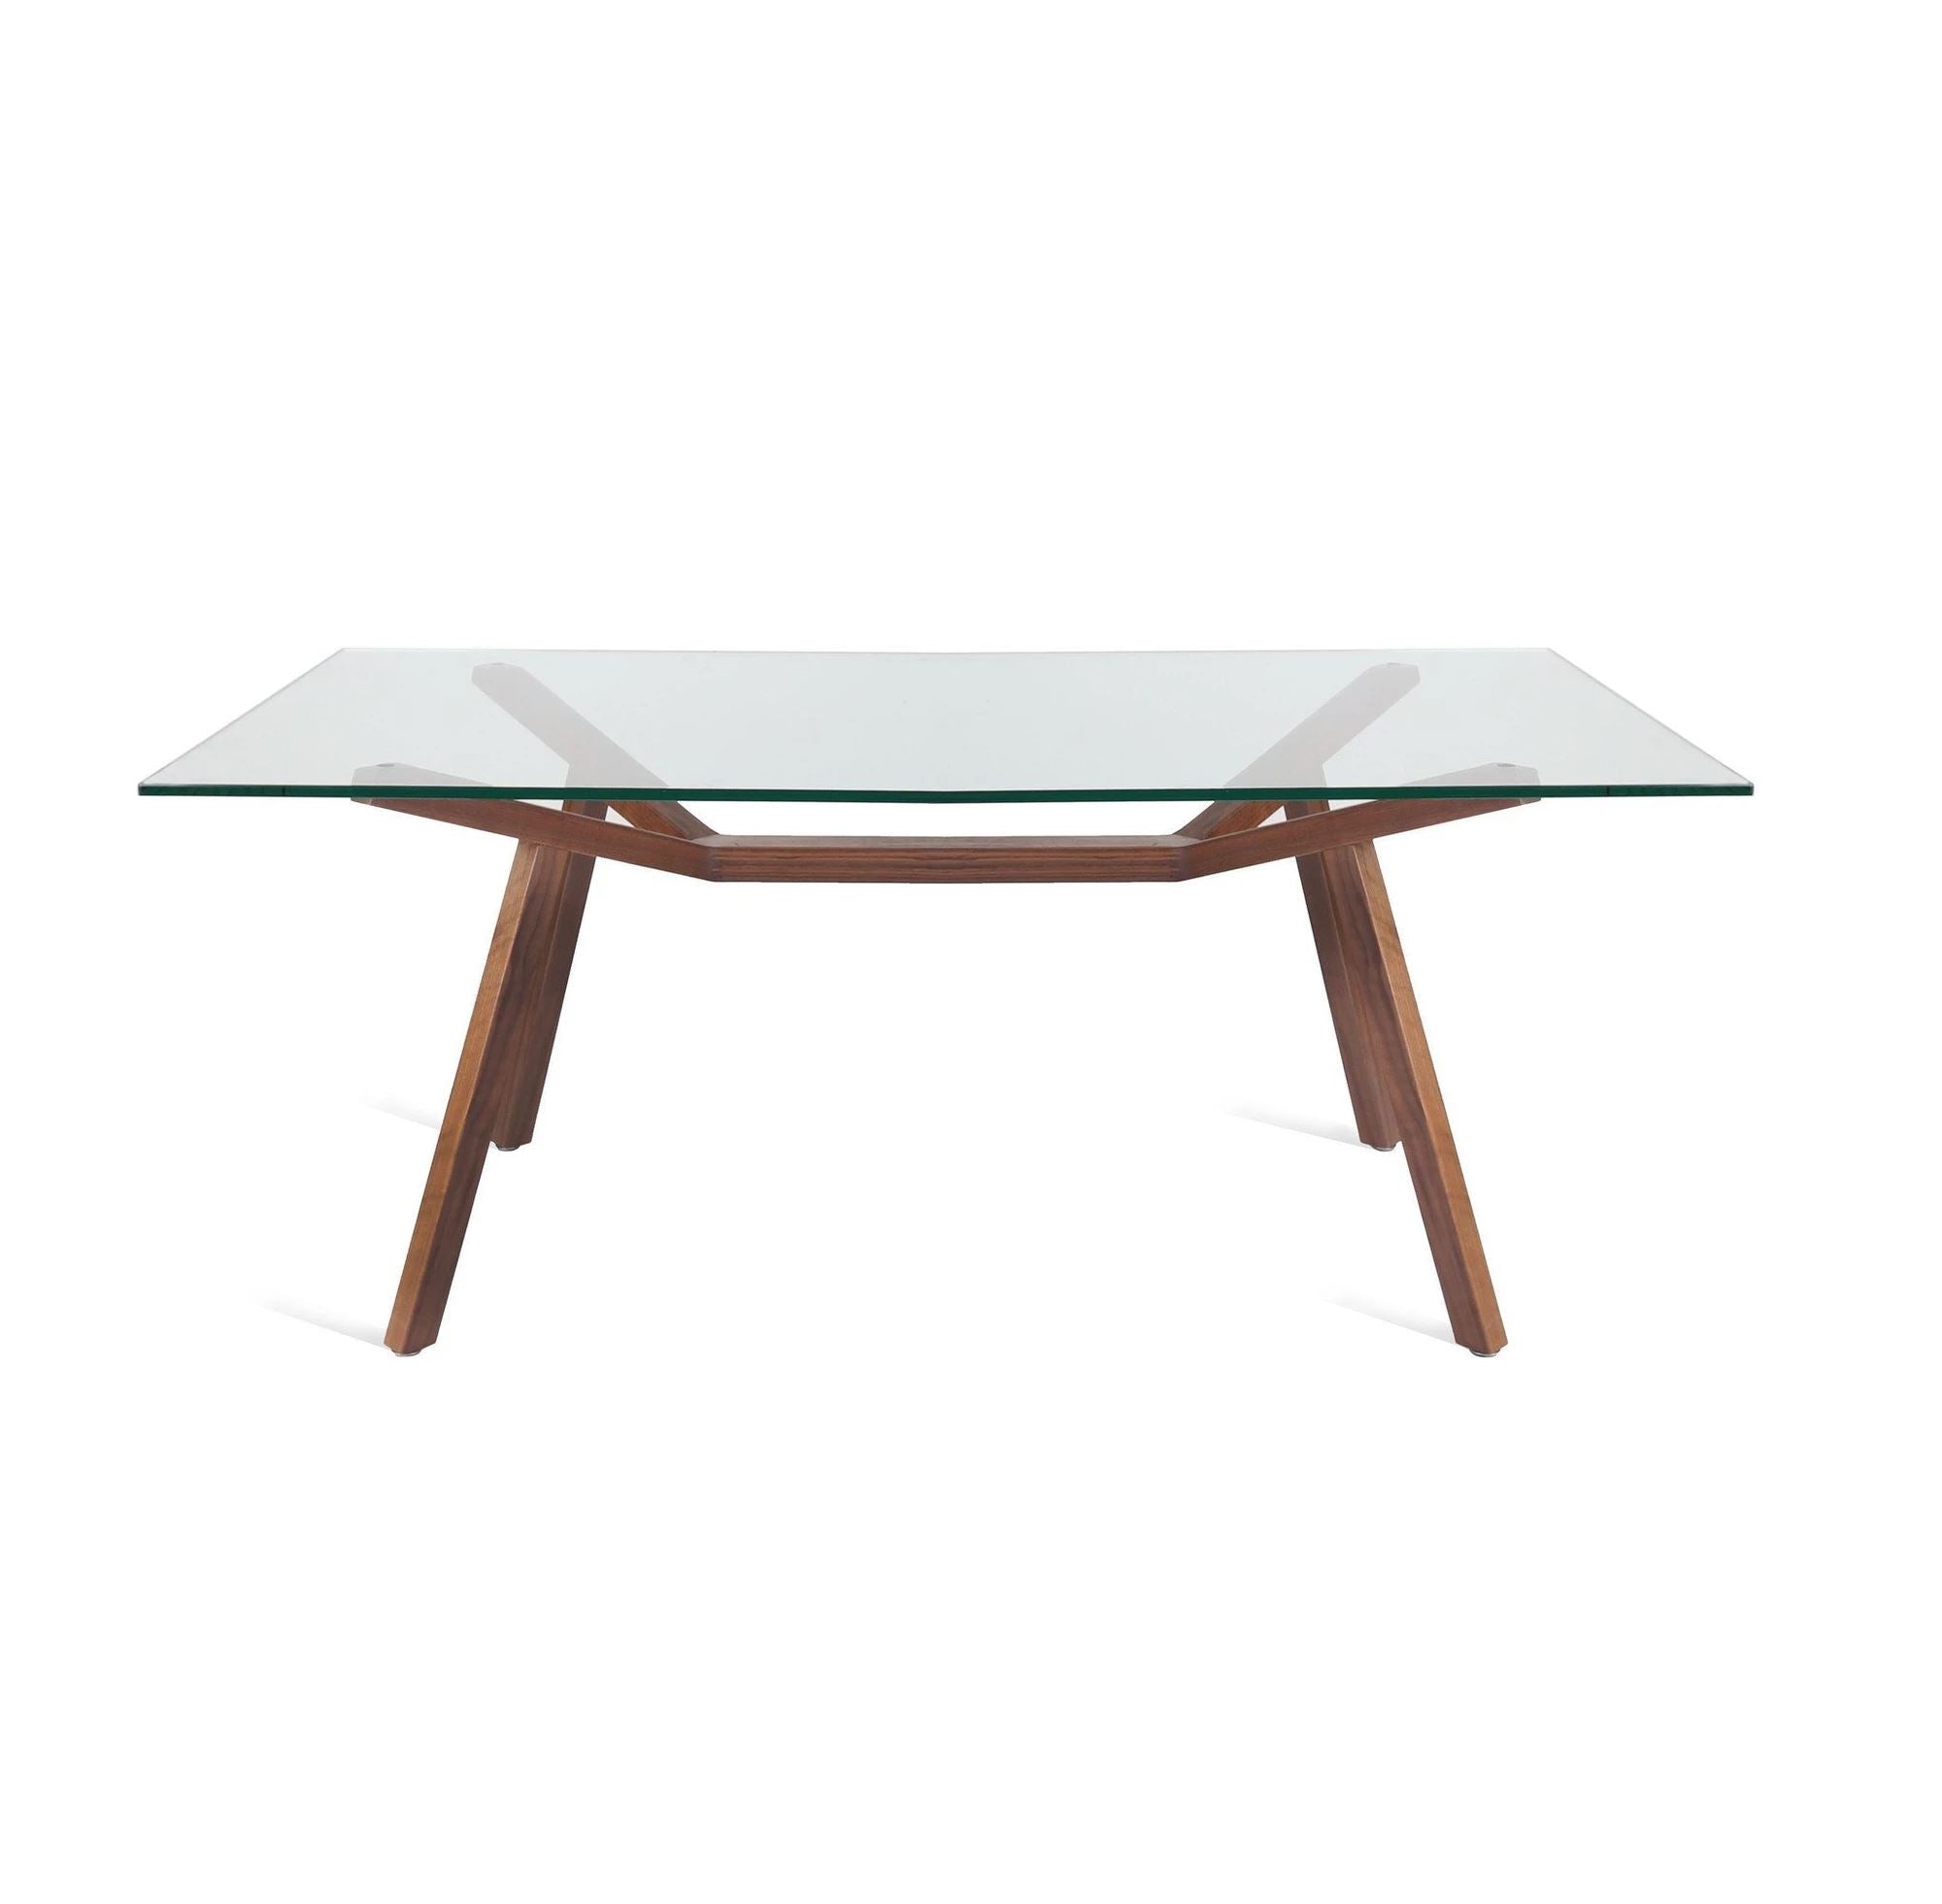 Sean Dix Style Forte Dining Table 140x85cm (Glass Top)